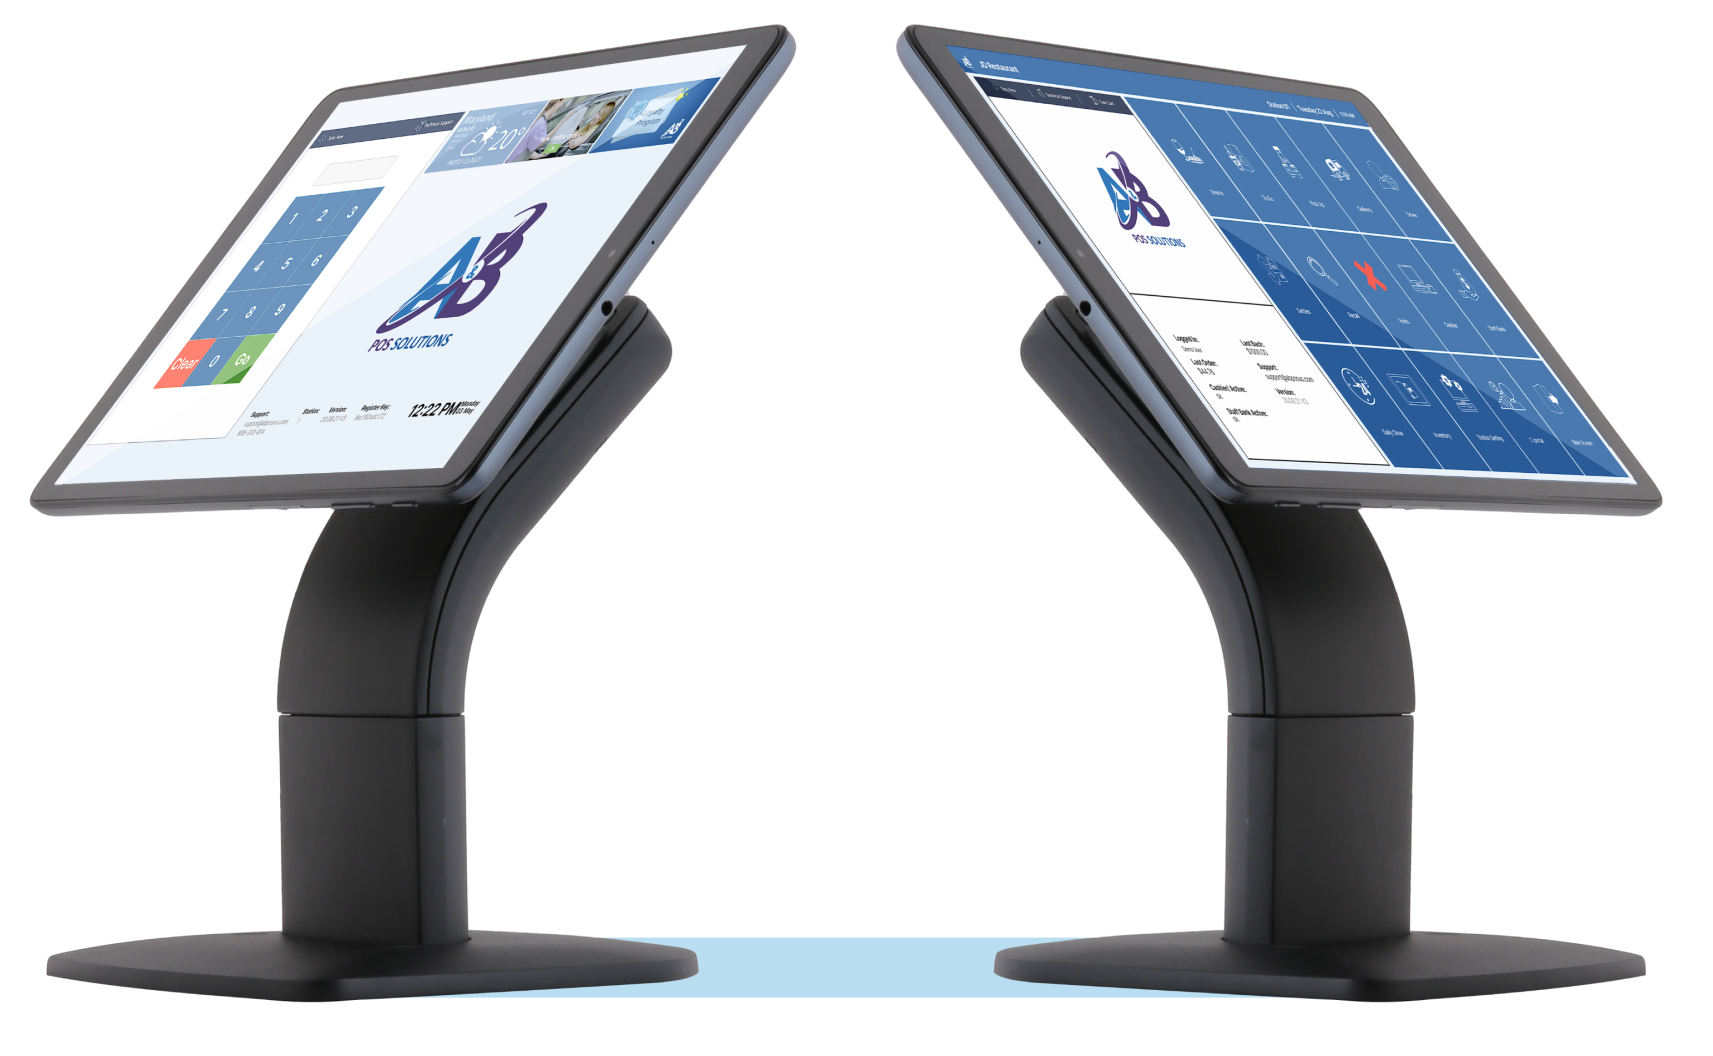 Point-of-sale combines powerful cloud-based software, payment processing, and beautiful hardware, all built for the restaurant industry 